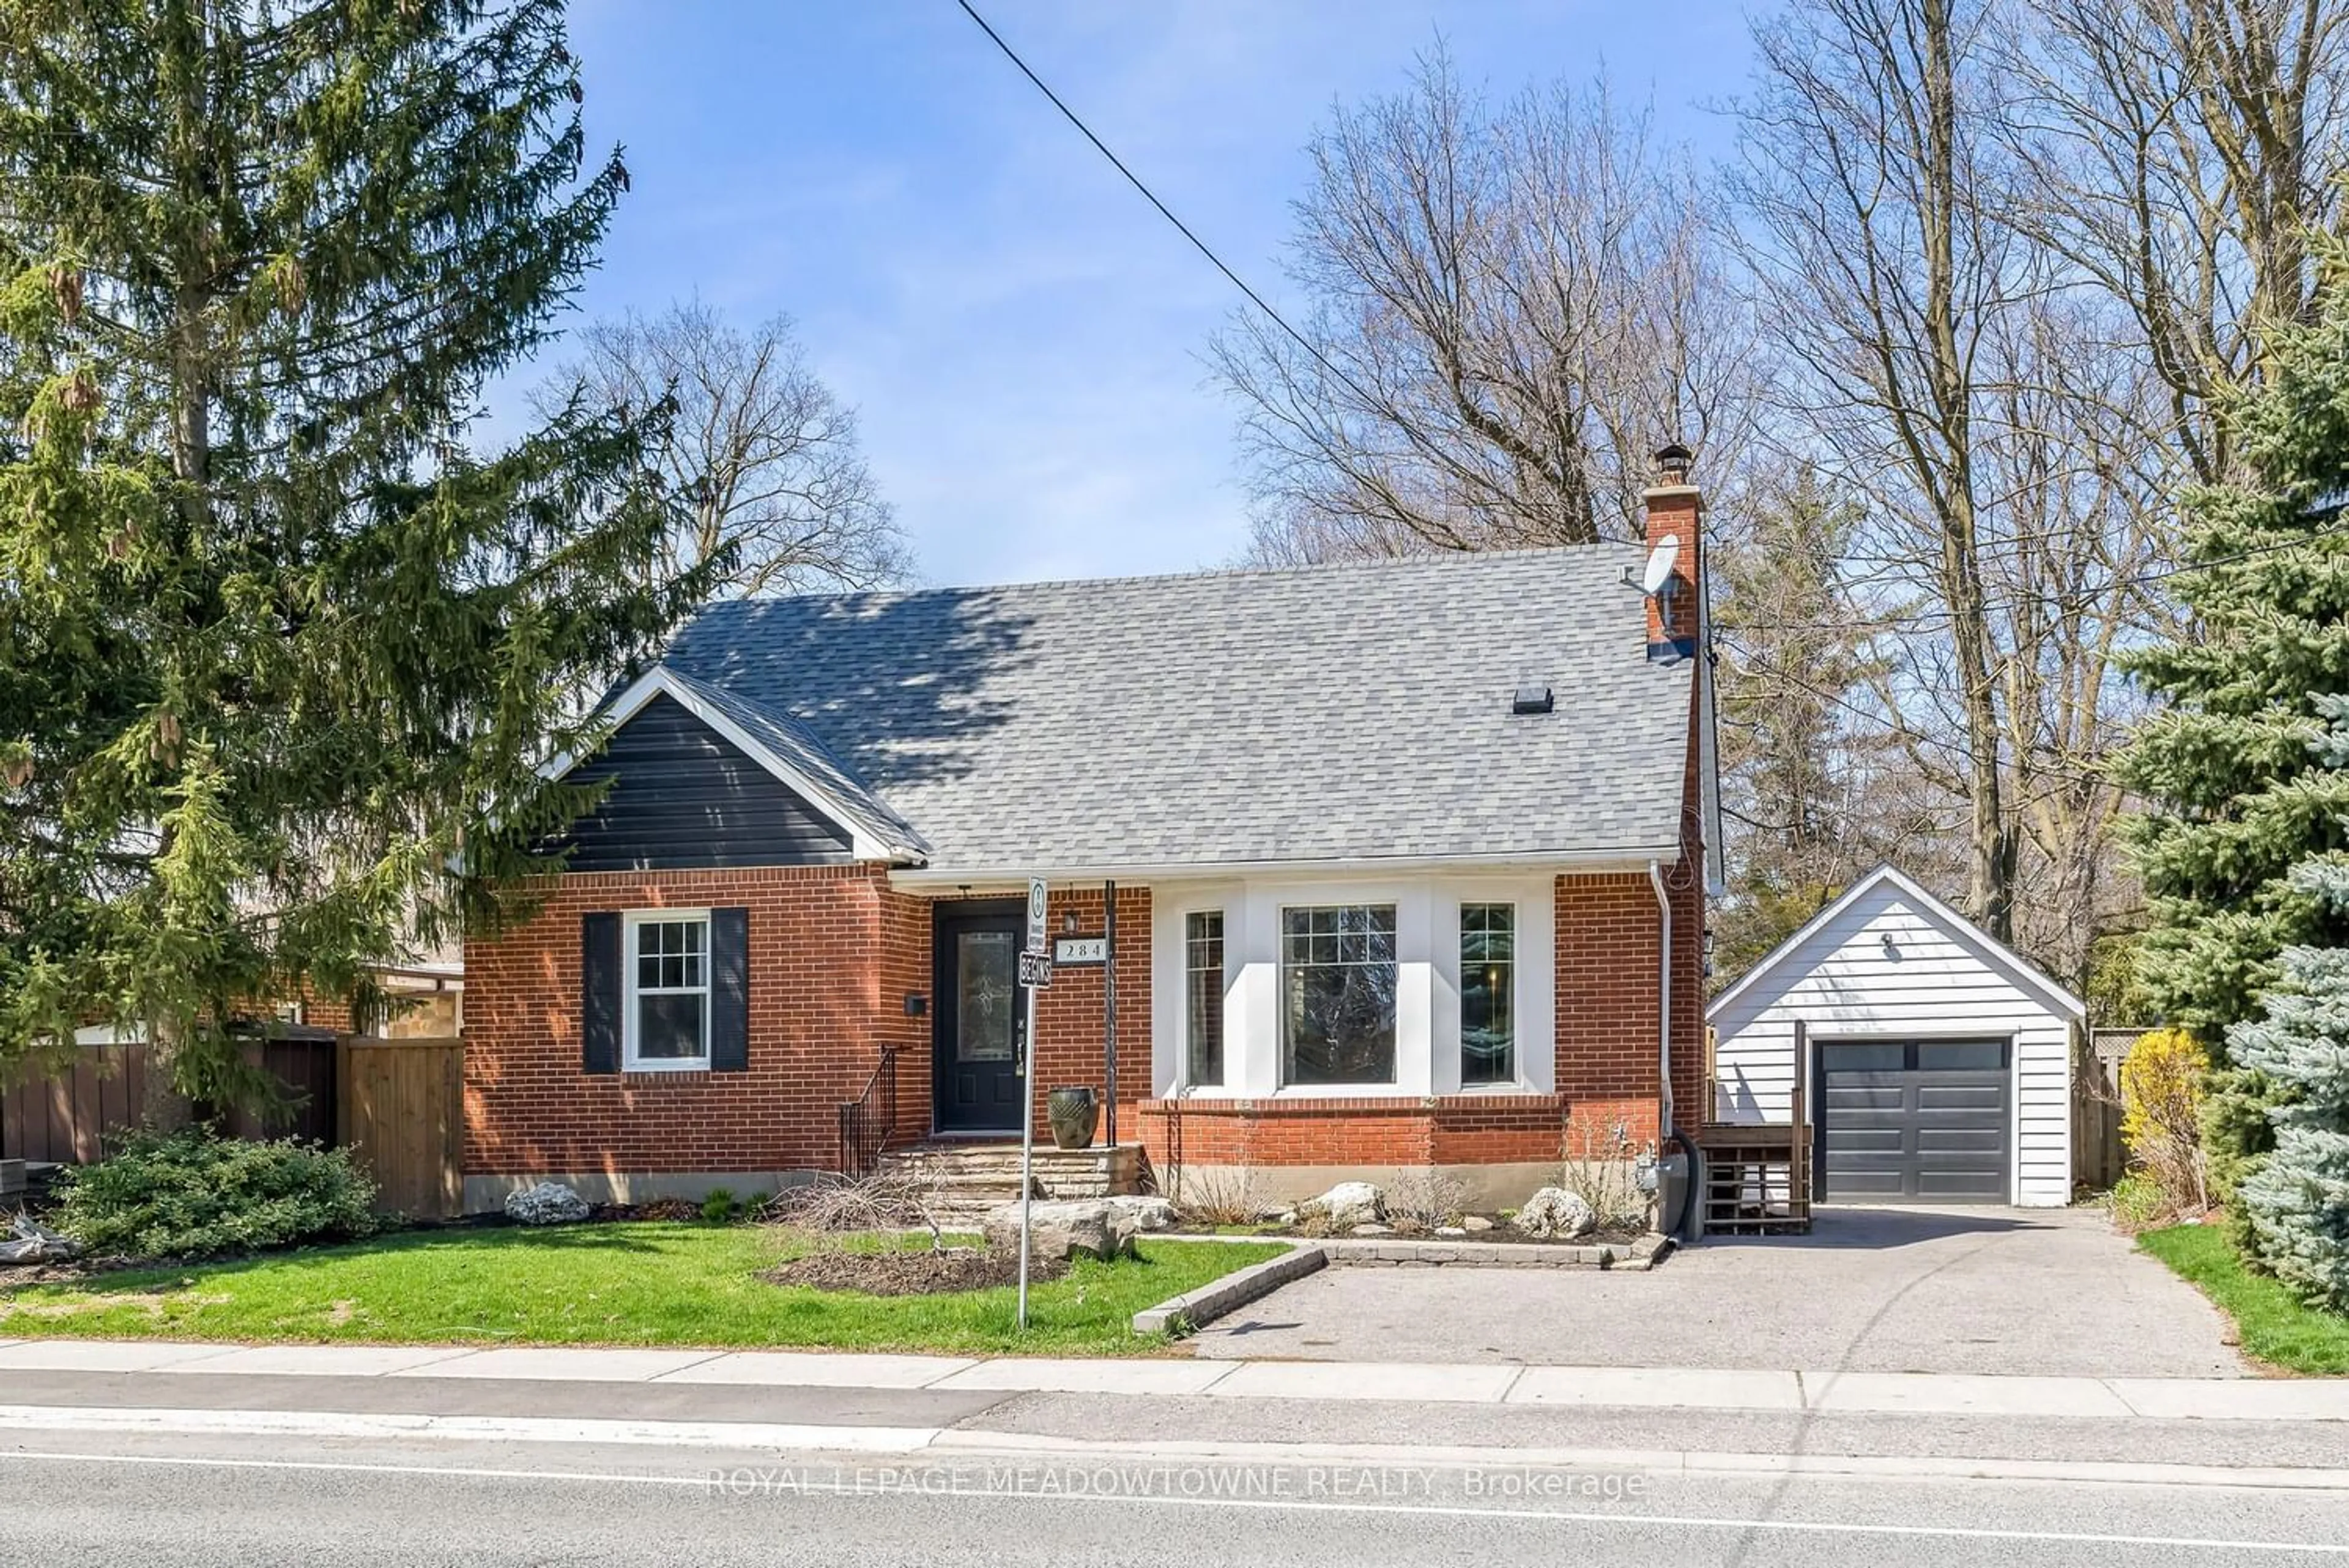 Home with brick exterior material for 284 Maple Ave, Halton Hills Ontario L7G 1W7